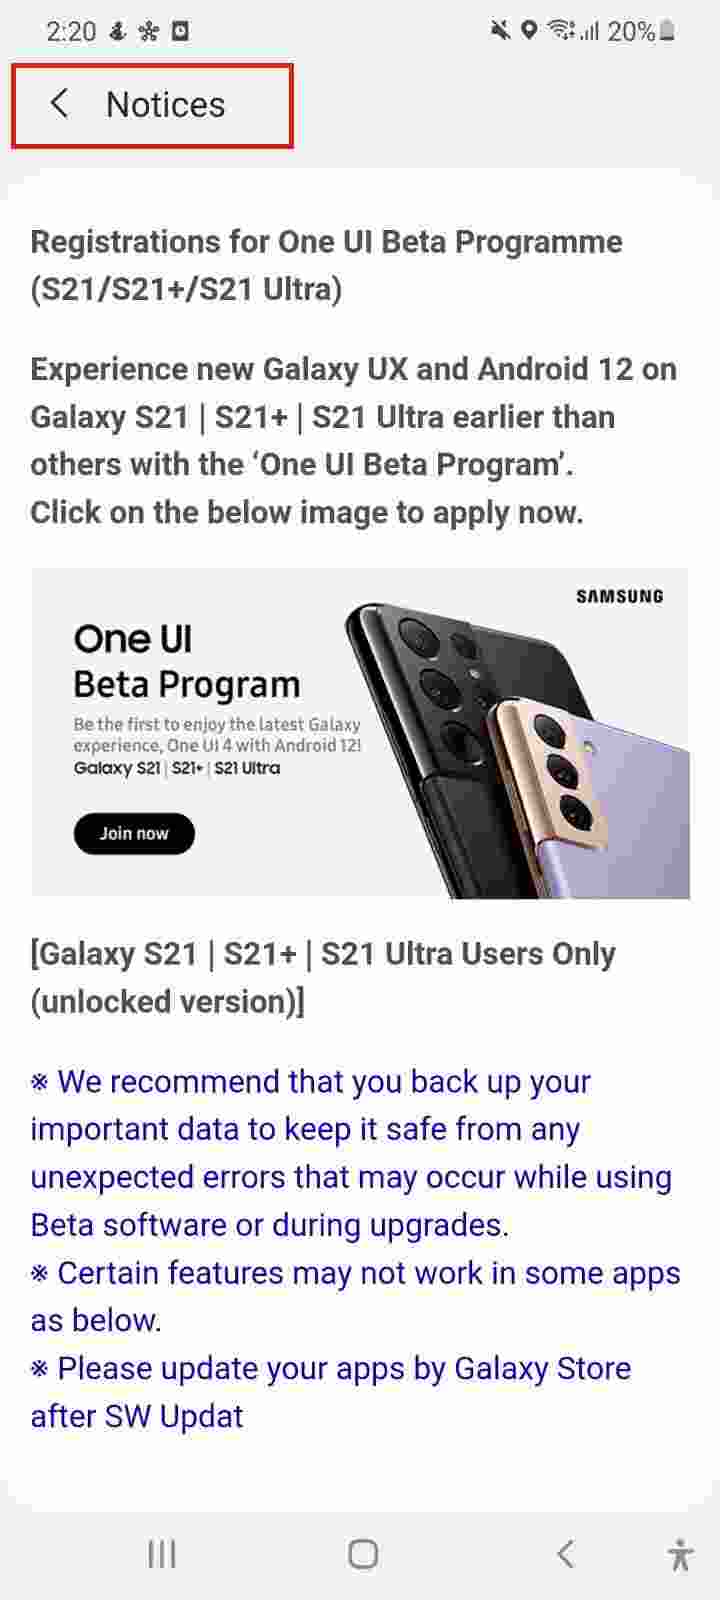 How To Download OneUI 4.0 Beta on Samsung Galaxy S21, Download OneUI 4.0 Beta on Samsung Galaxy S21, Download OneUI 4.0 Beta on Samsung, OneUI 4.0 Beta features, OneUI 4.0 Beta on Samsung, OneUI 4.0 Beta features